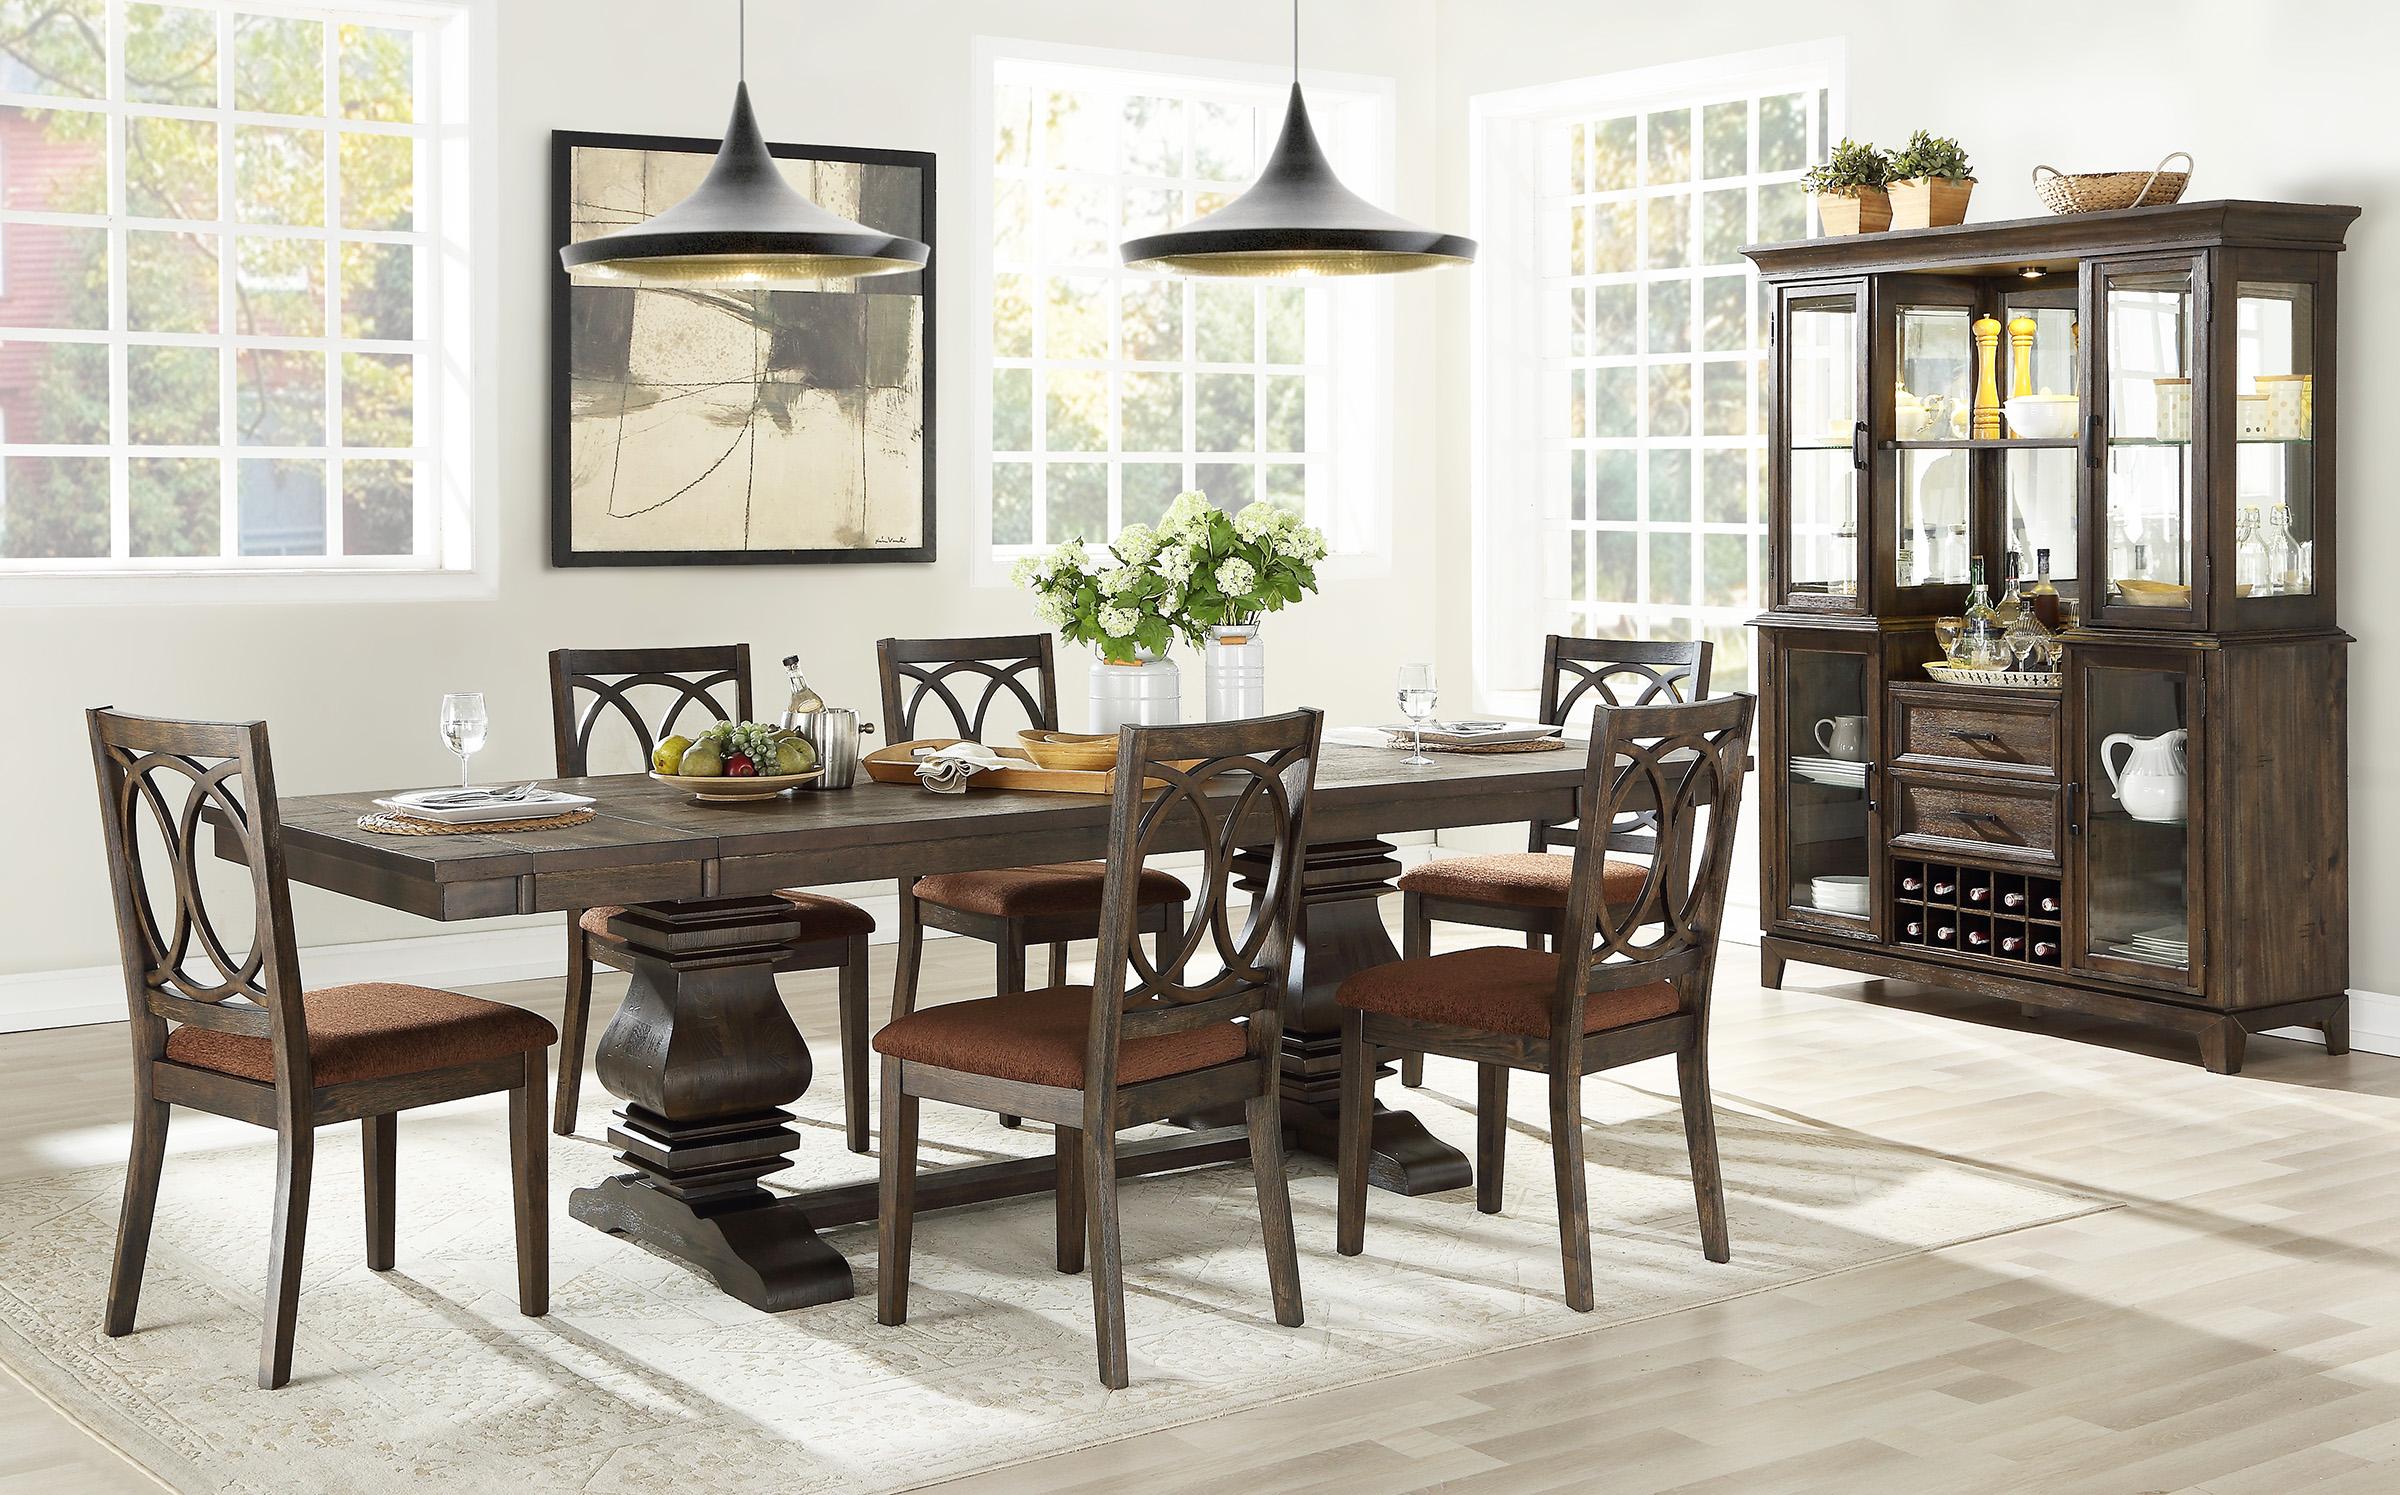 Classic, Traditional Dining Table Set Jameson 62320-Set-8 in Espresso, Brown Fabric